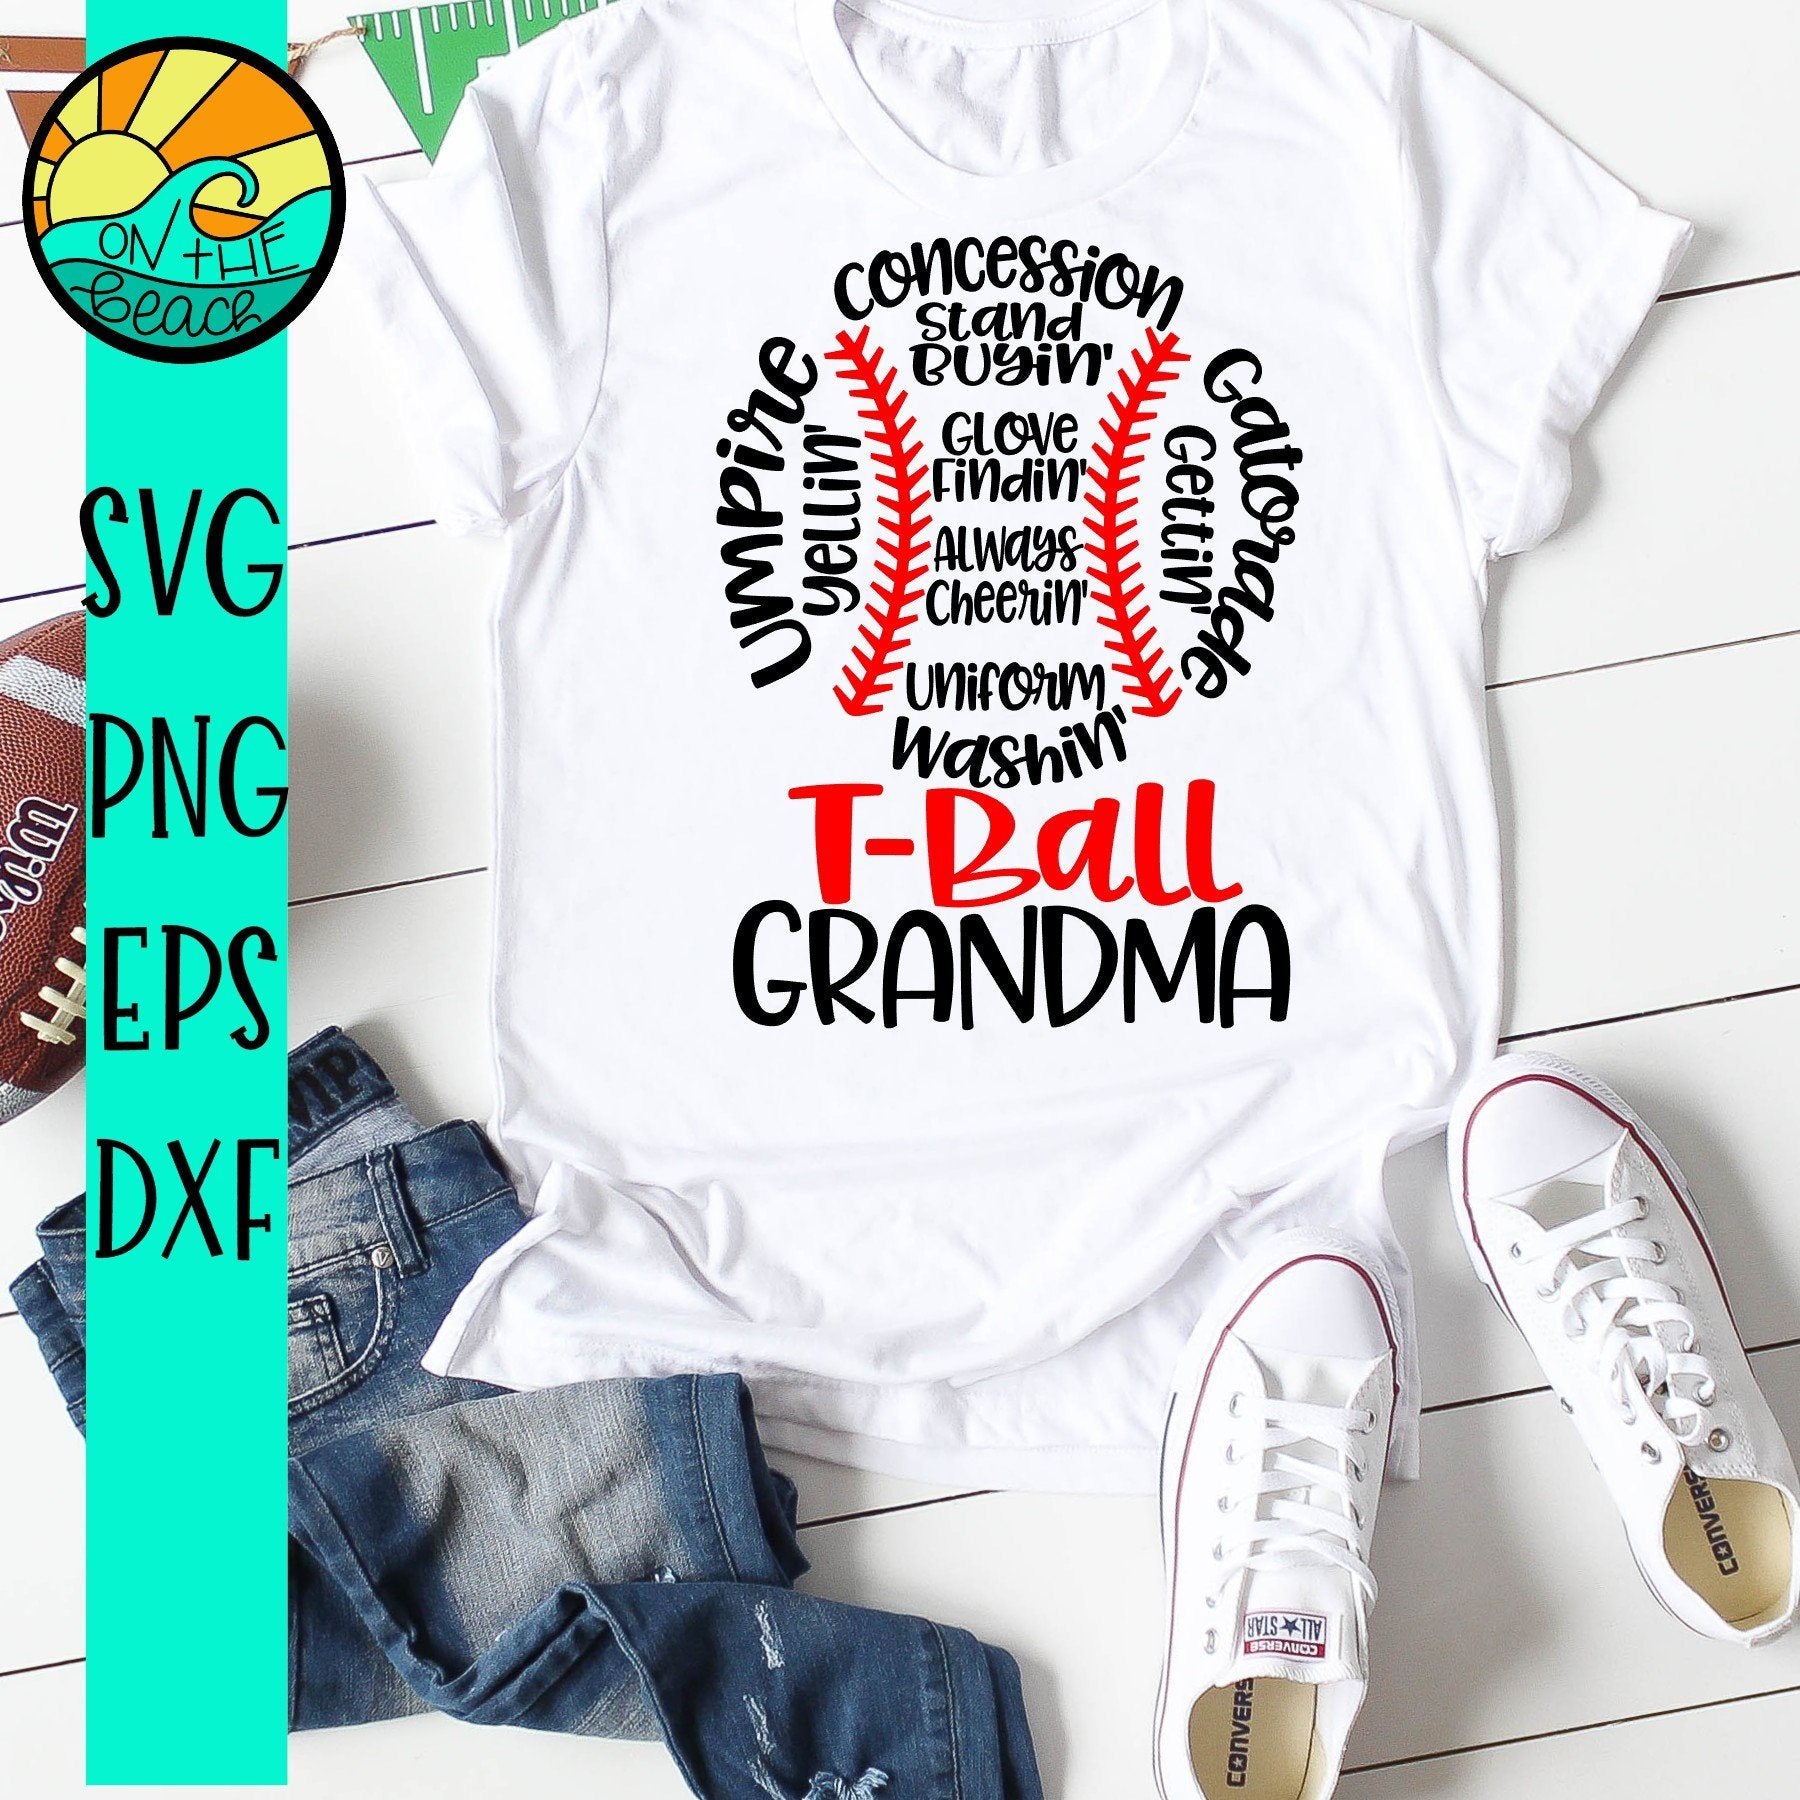 Download T Ball Grandma Words Svg Png Dxf Eps So Fontsy